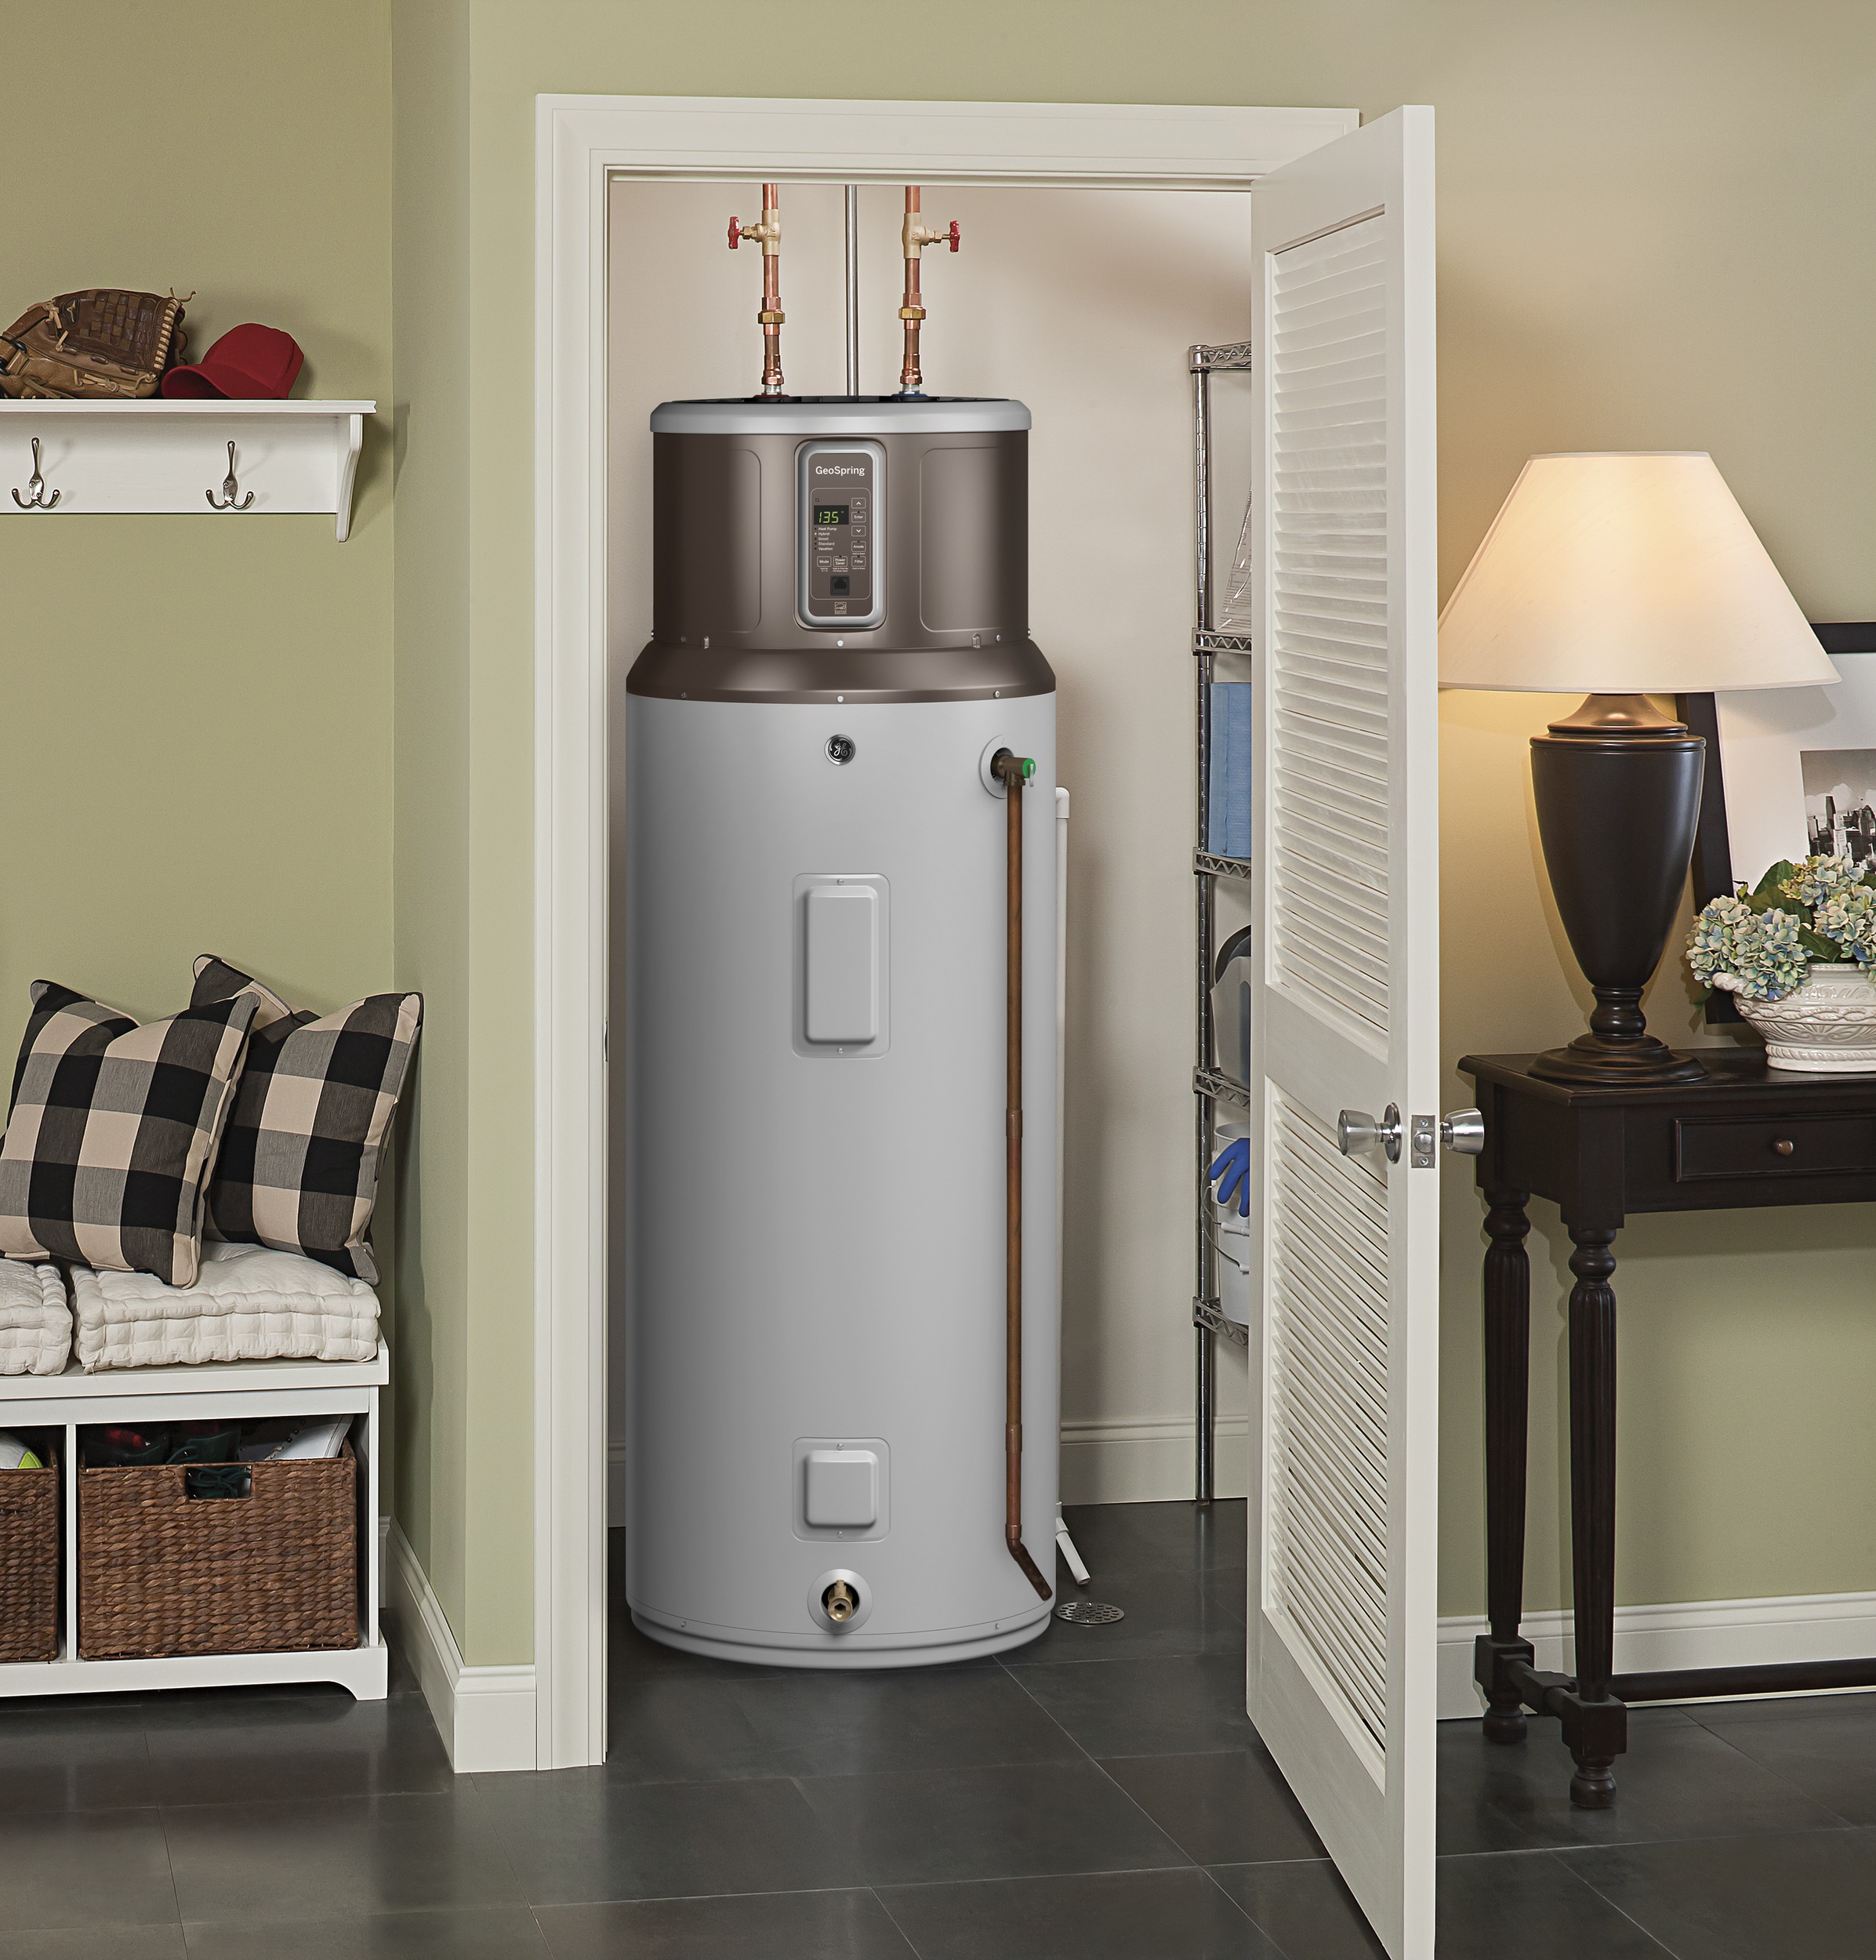 Top 101+ Images pictures of hot water heaters Sharp